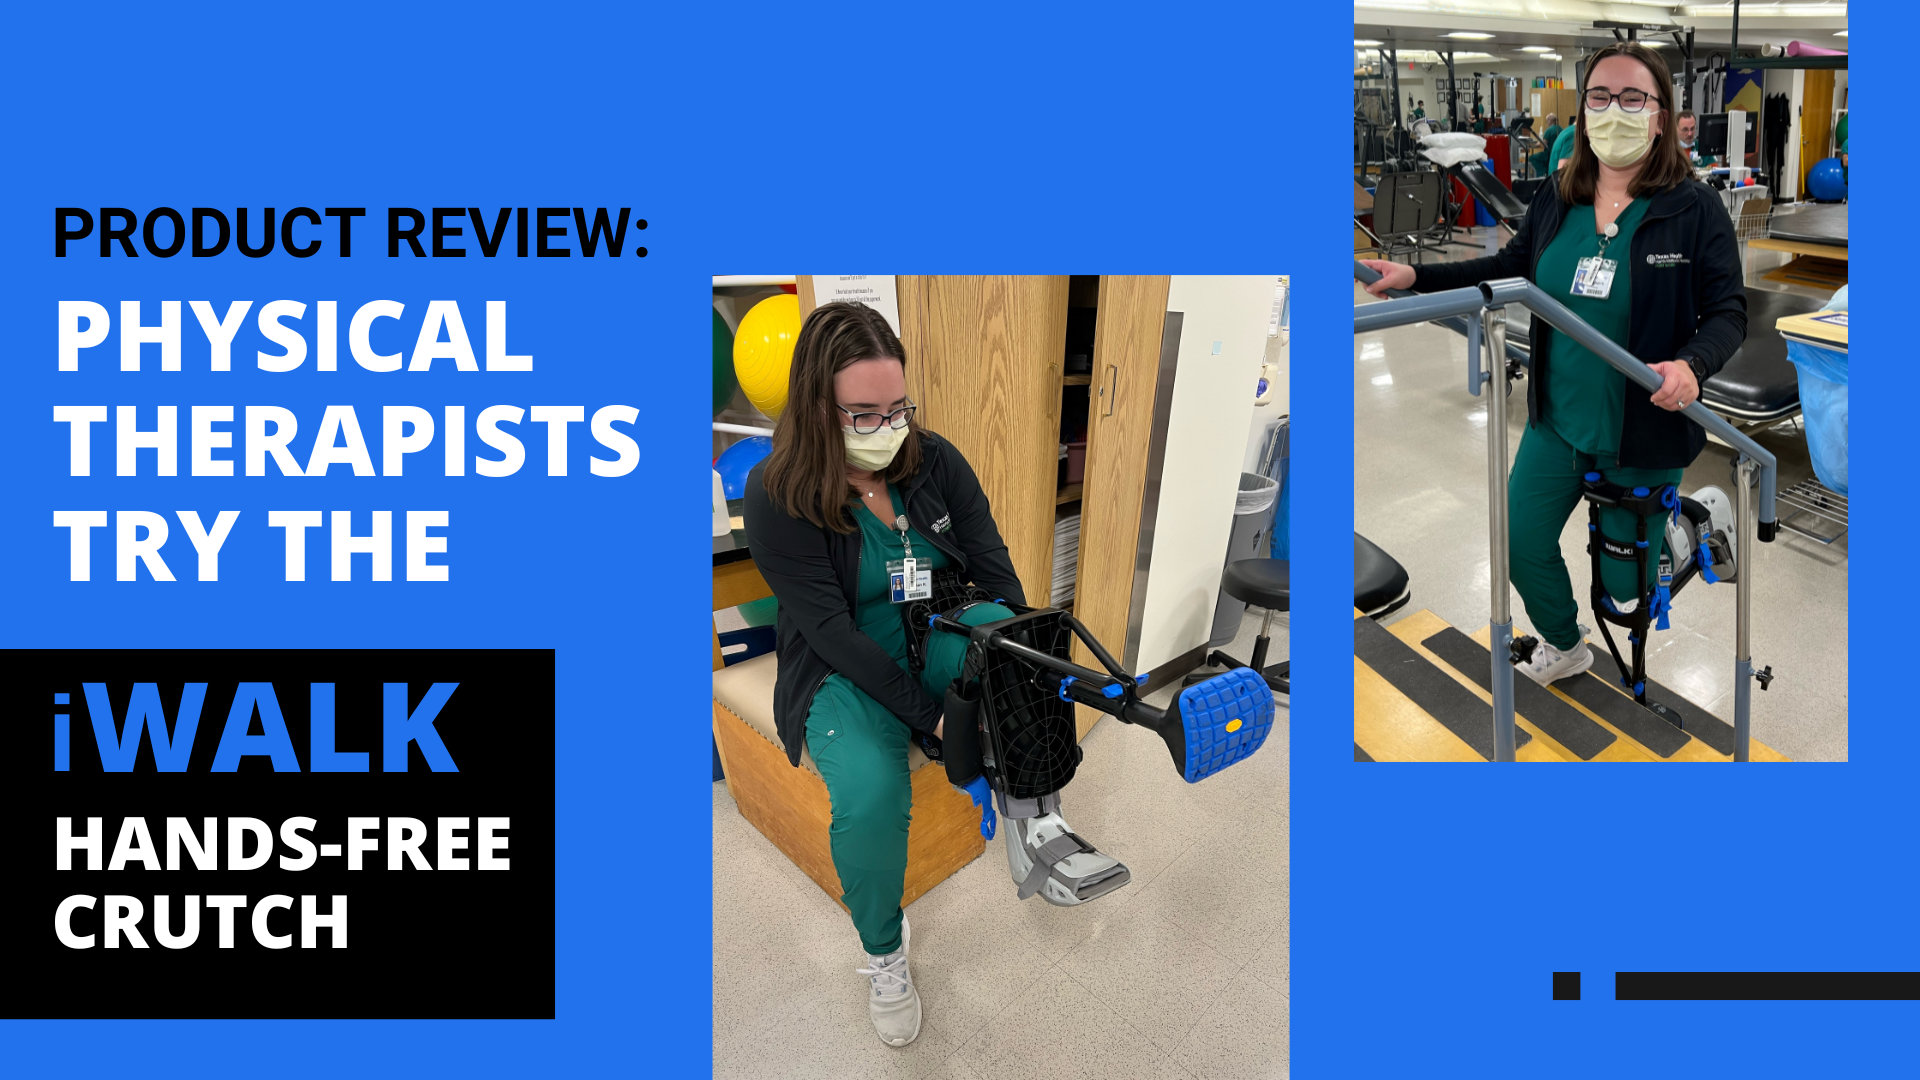 Physical Therapist Try the iWALK hands-free crutch - iWALKFree